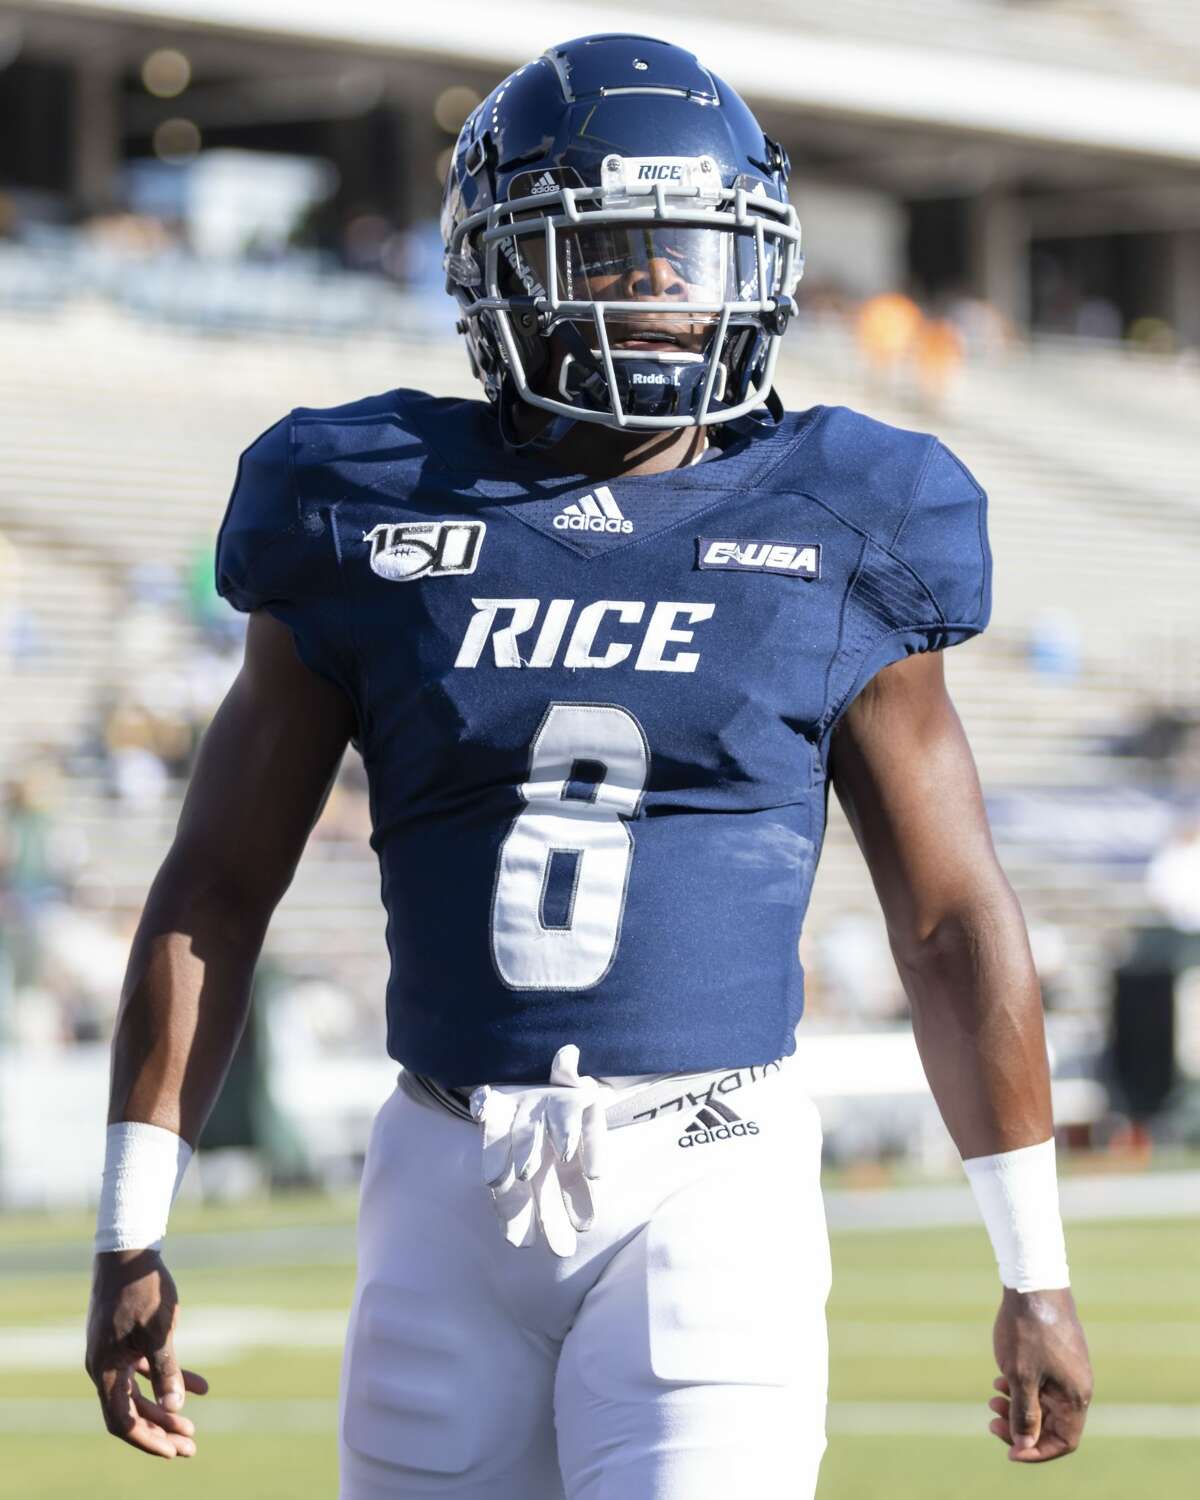 Rice receiver Cameron Montgomery (8) warms up before a college football game against Baylor Saturday, Sep 21, 2019, in Houston.